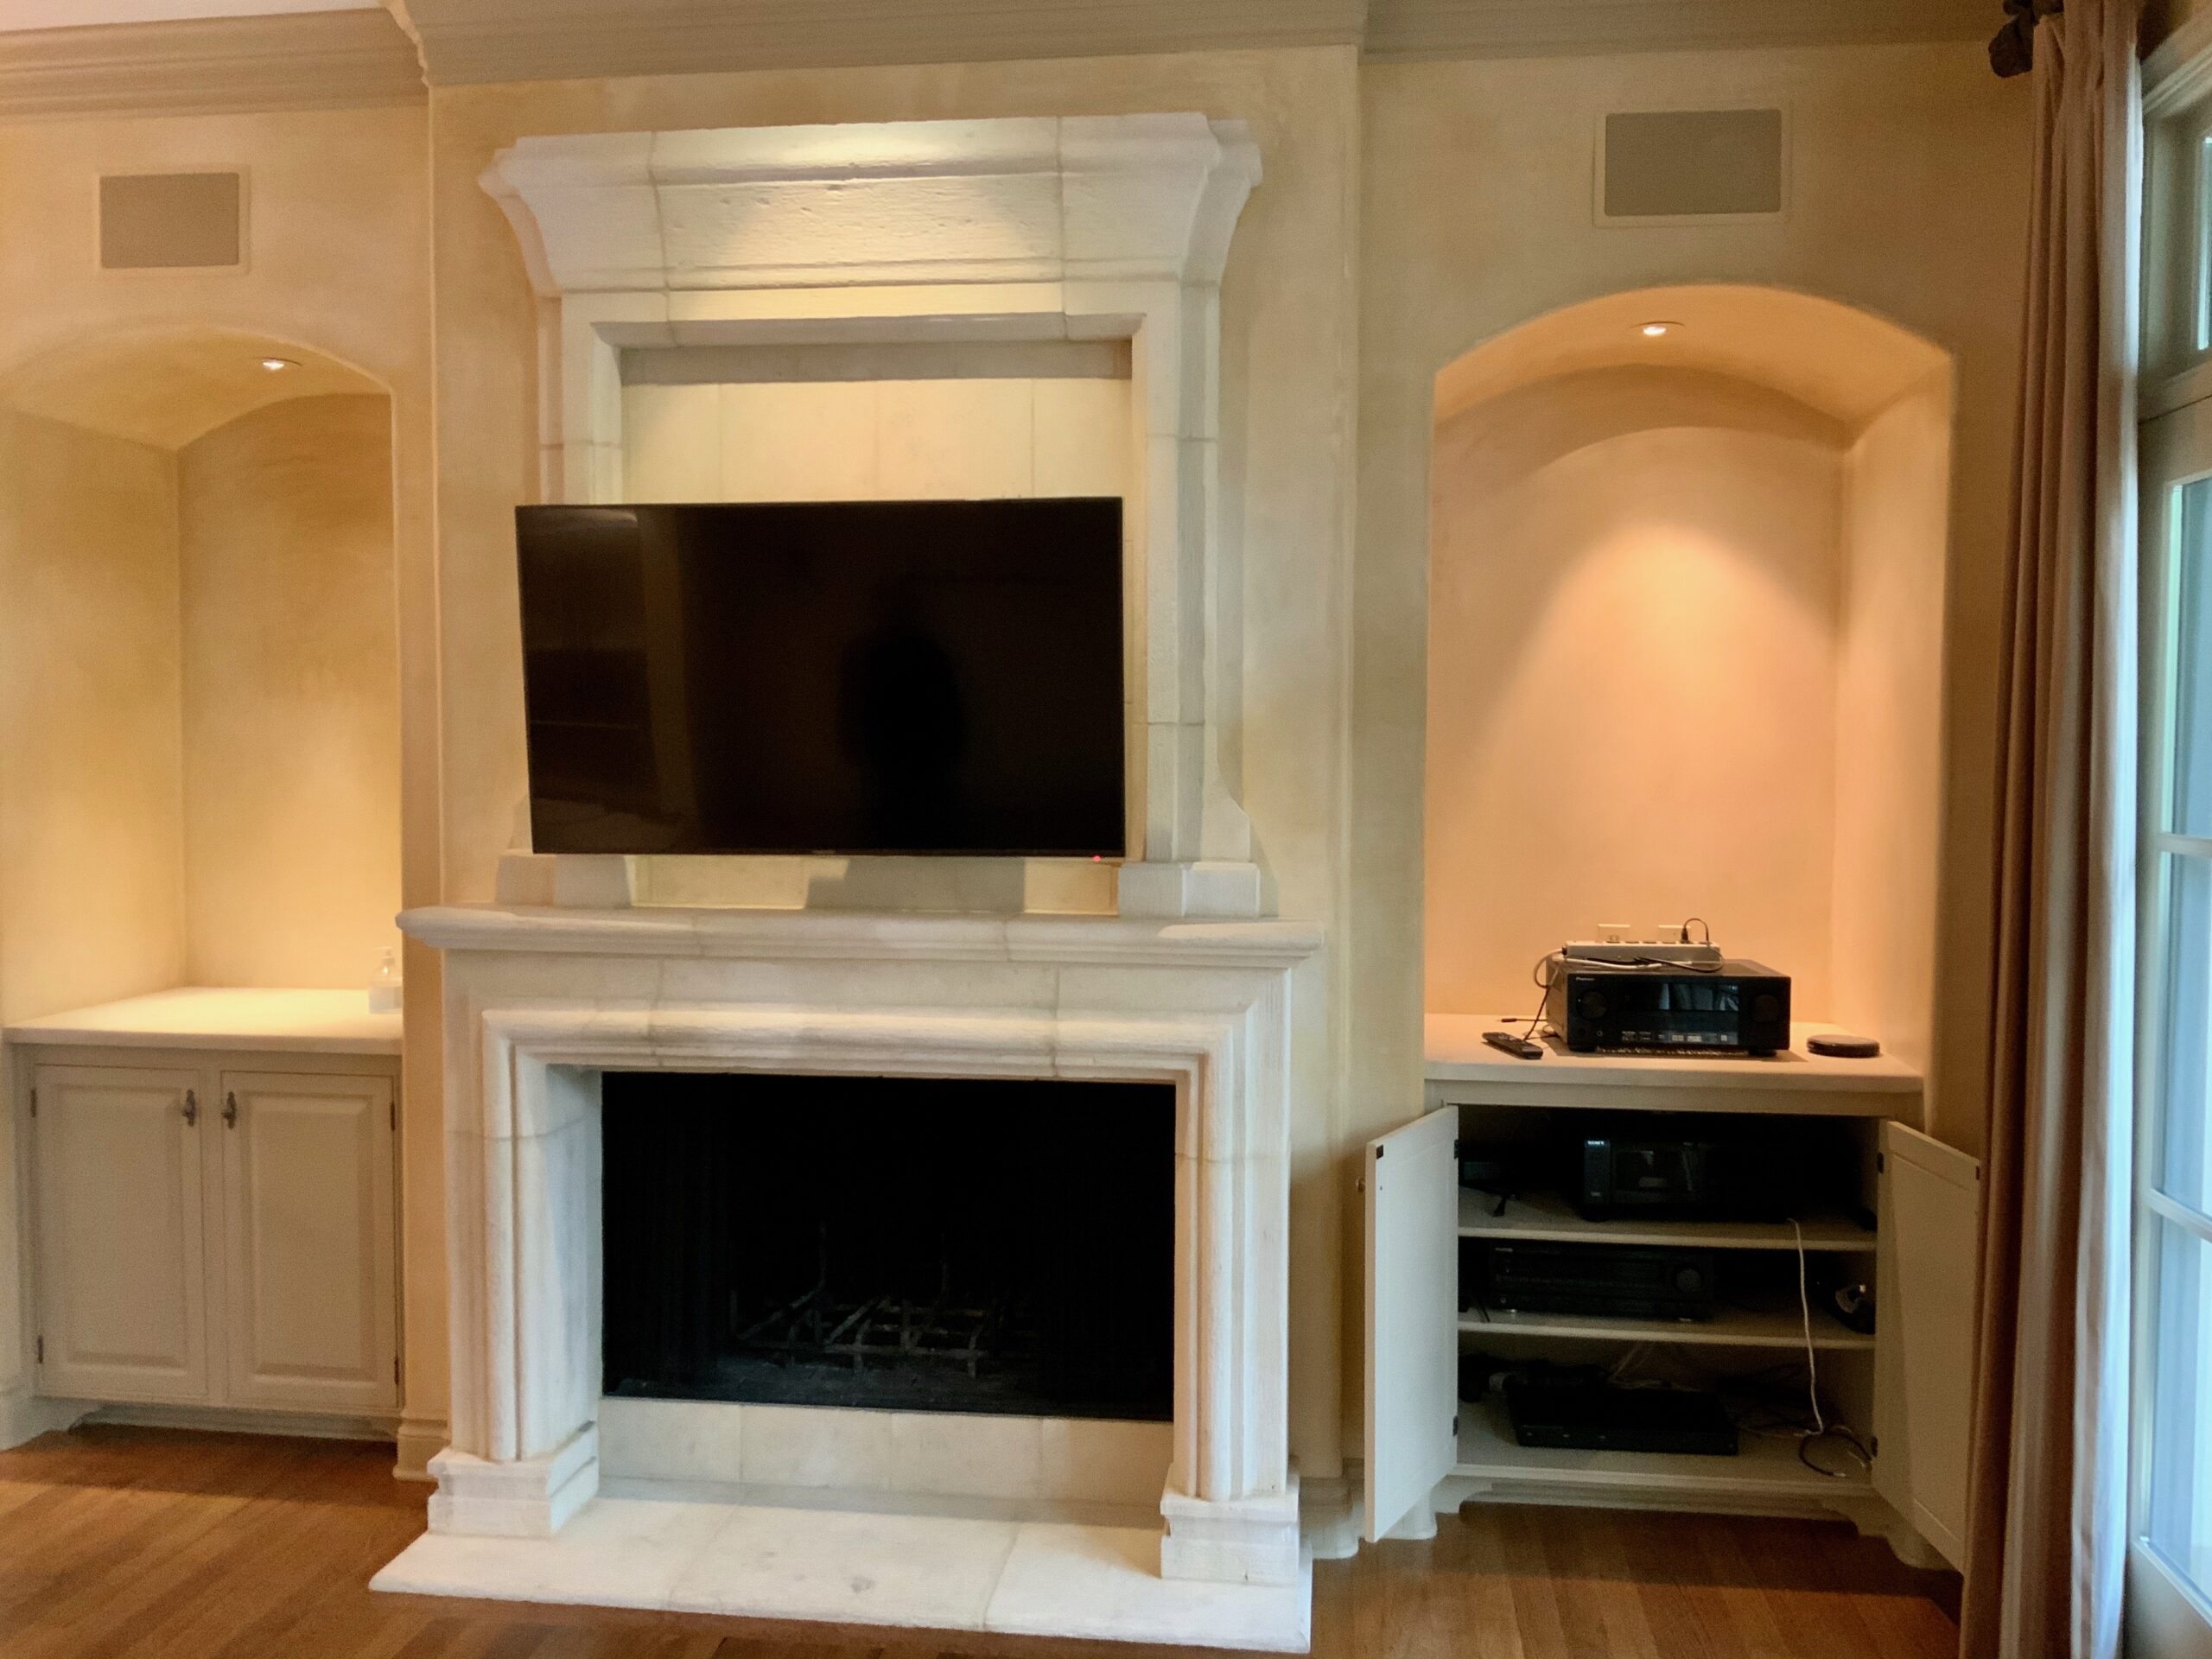 Fireplace TV mounted above with integrated surround sound system